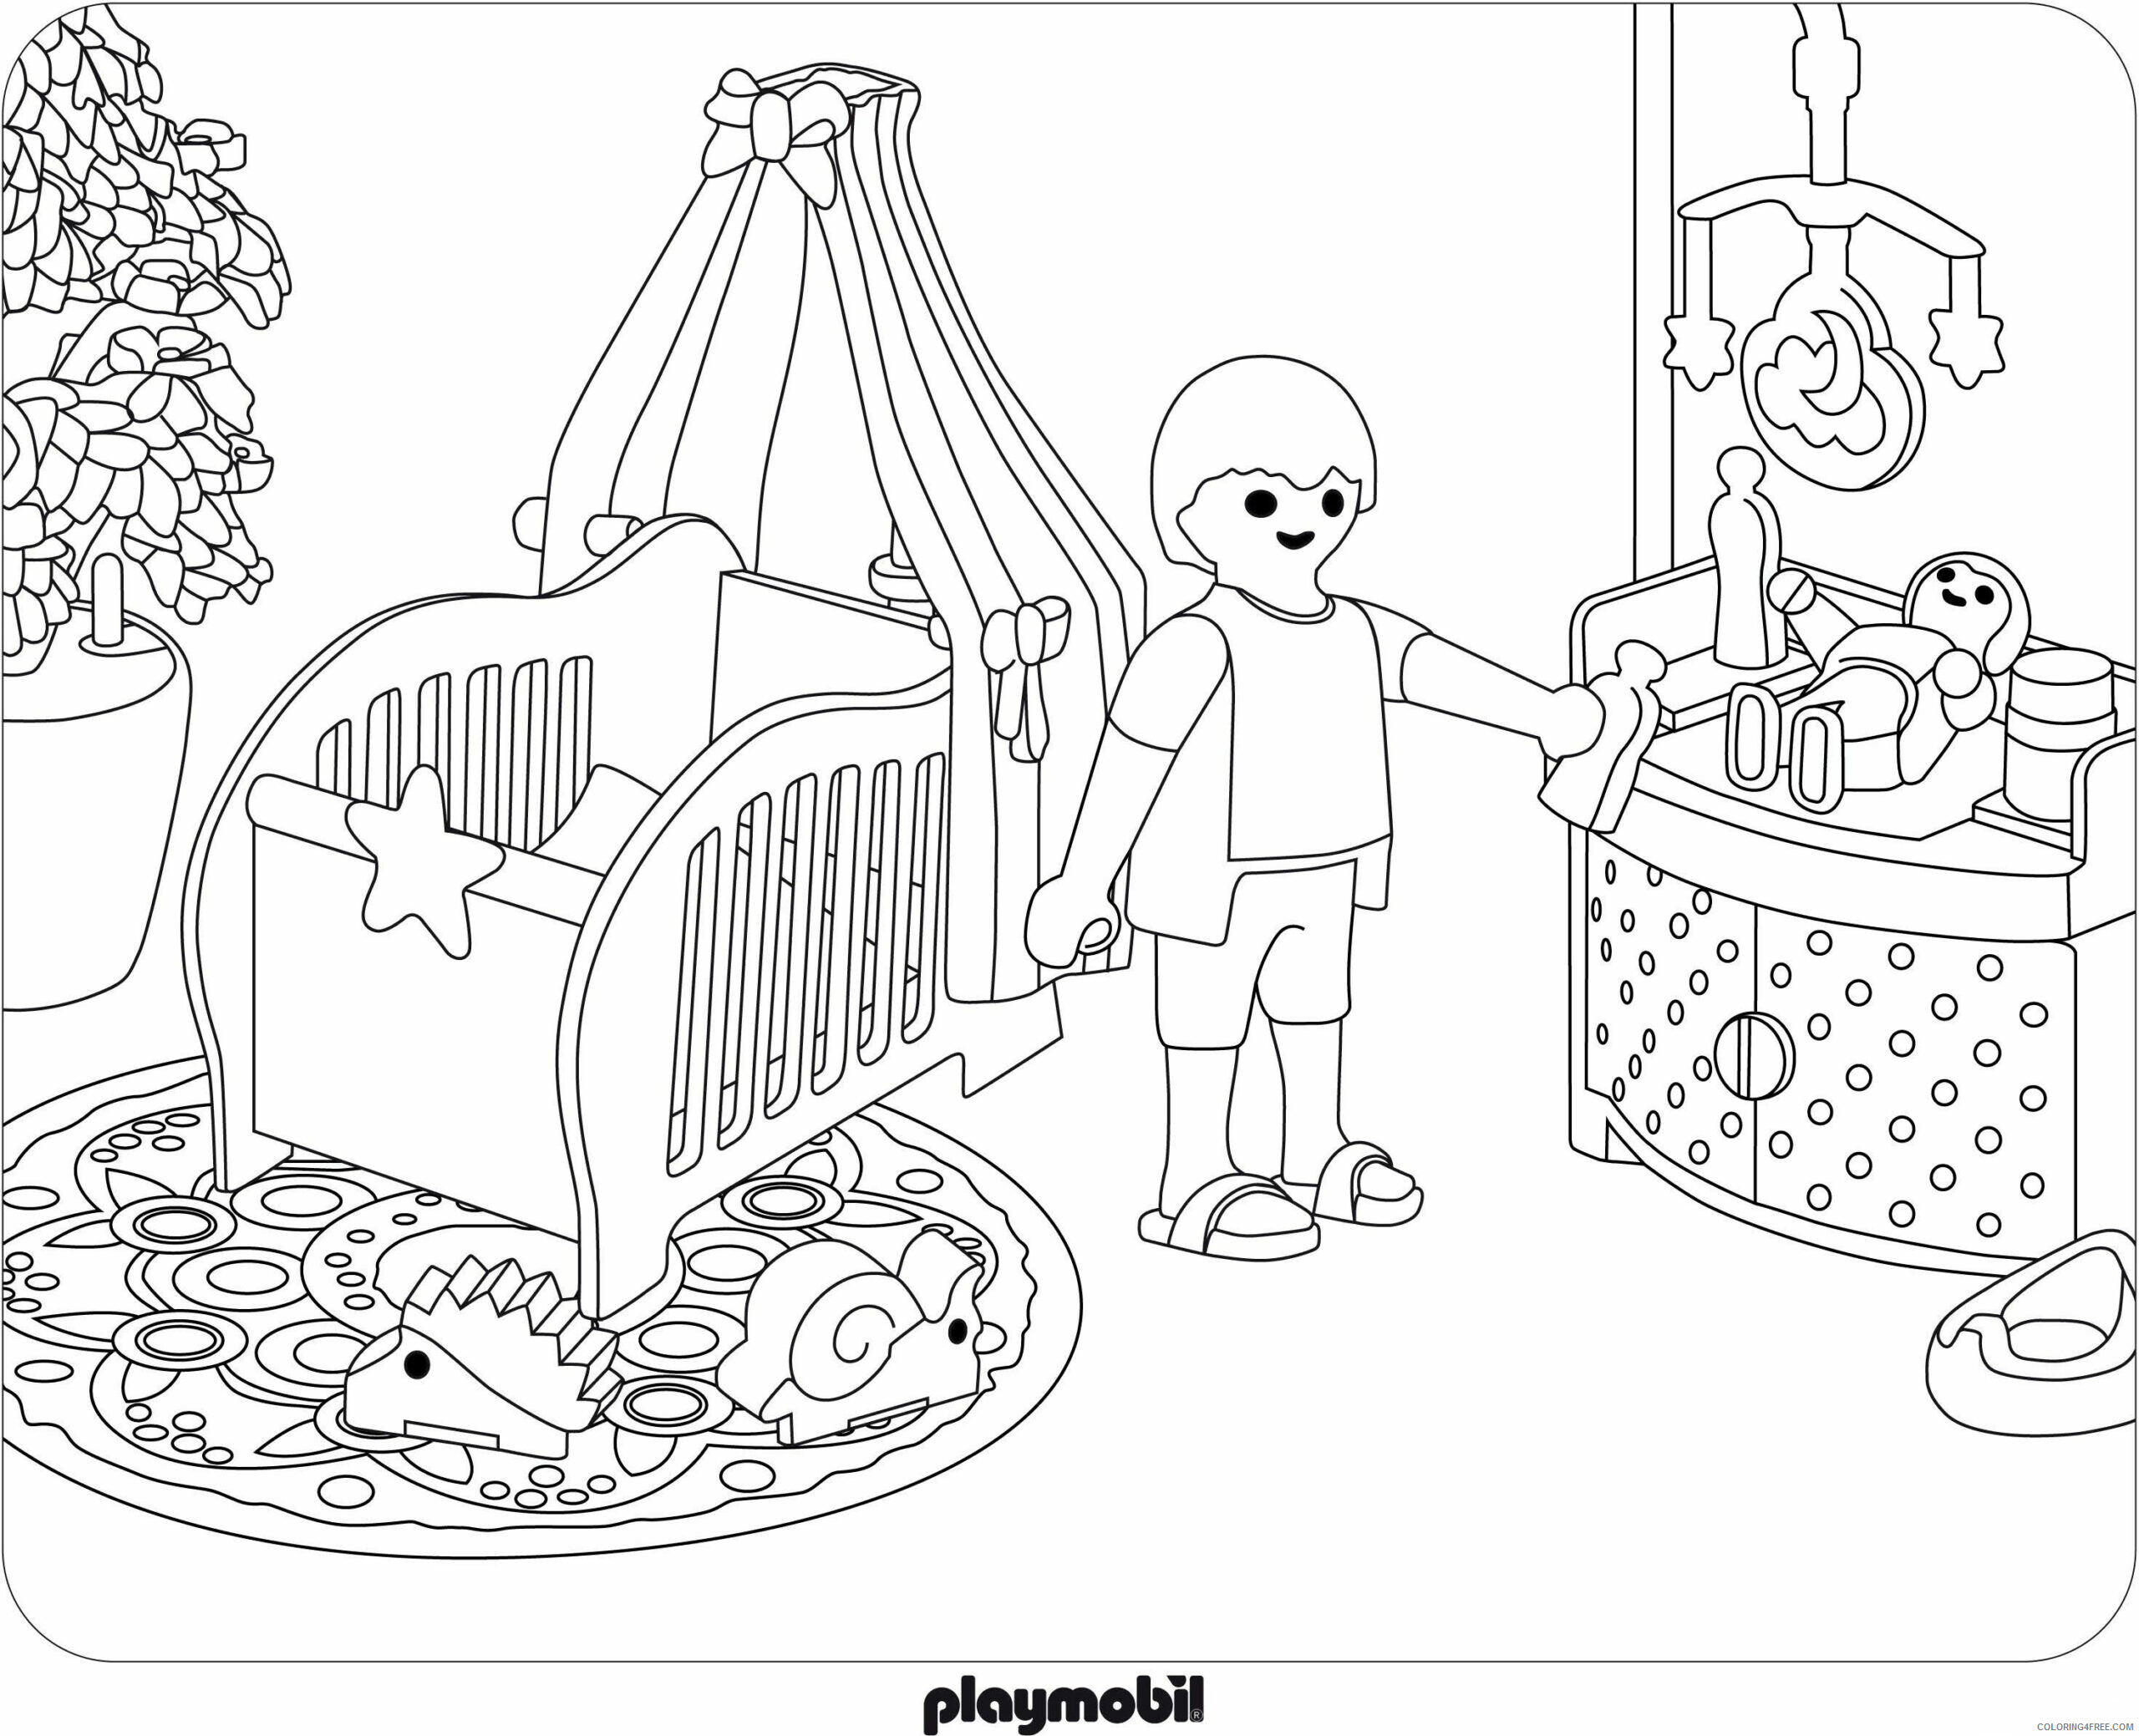 Playmobil Coloring Pages Playmobil Baby Printable 2021 4622 Coloring4free